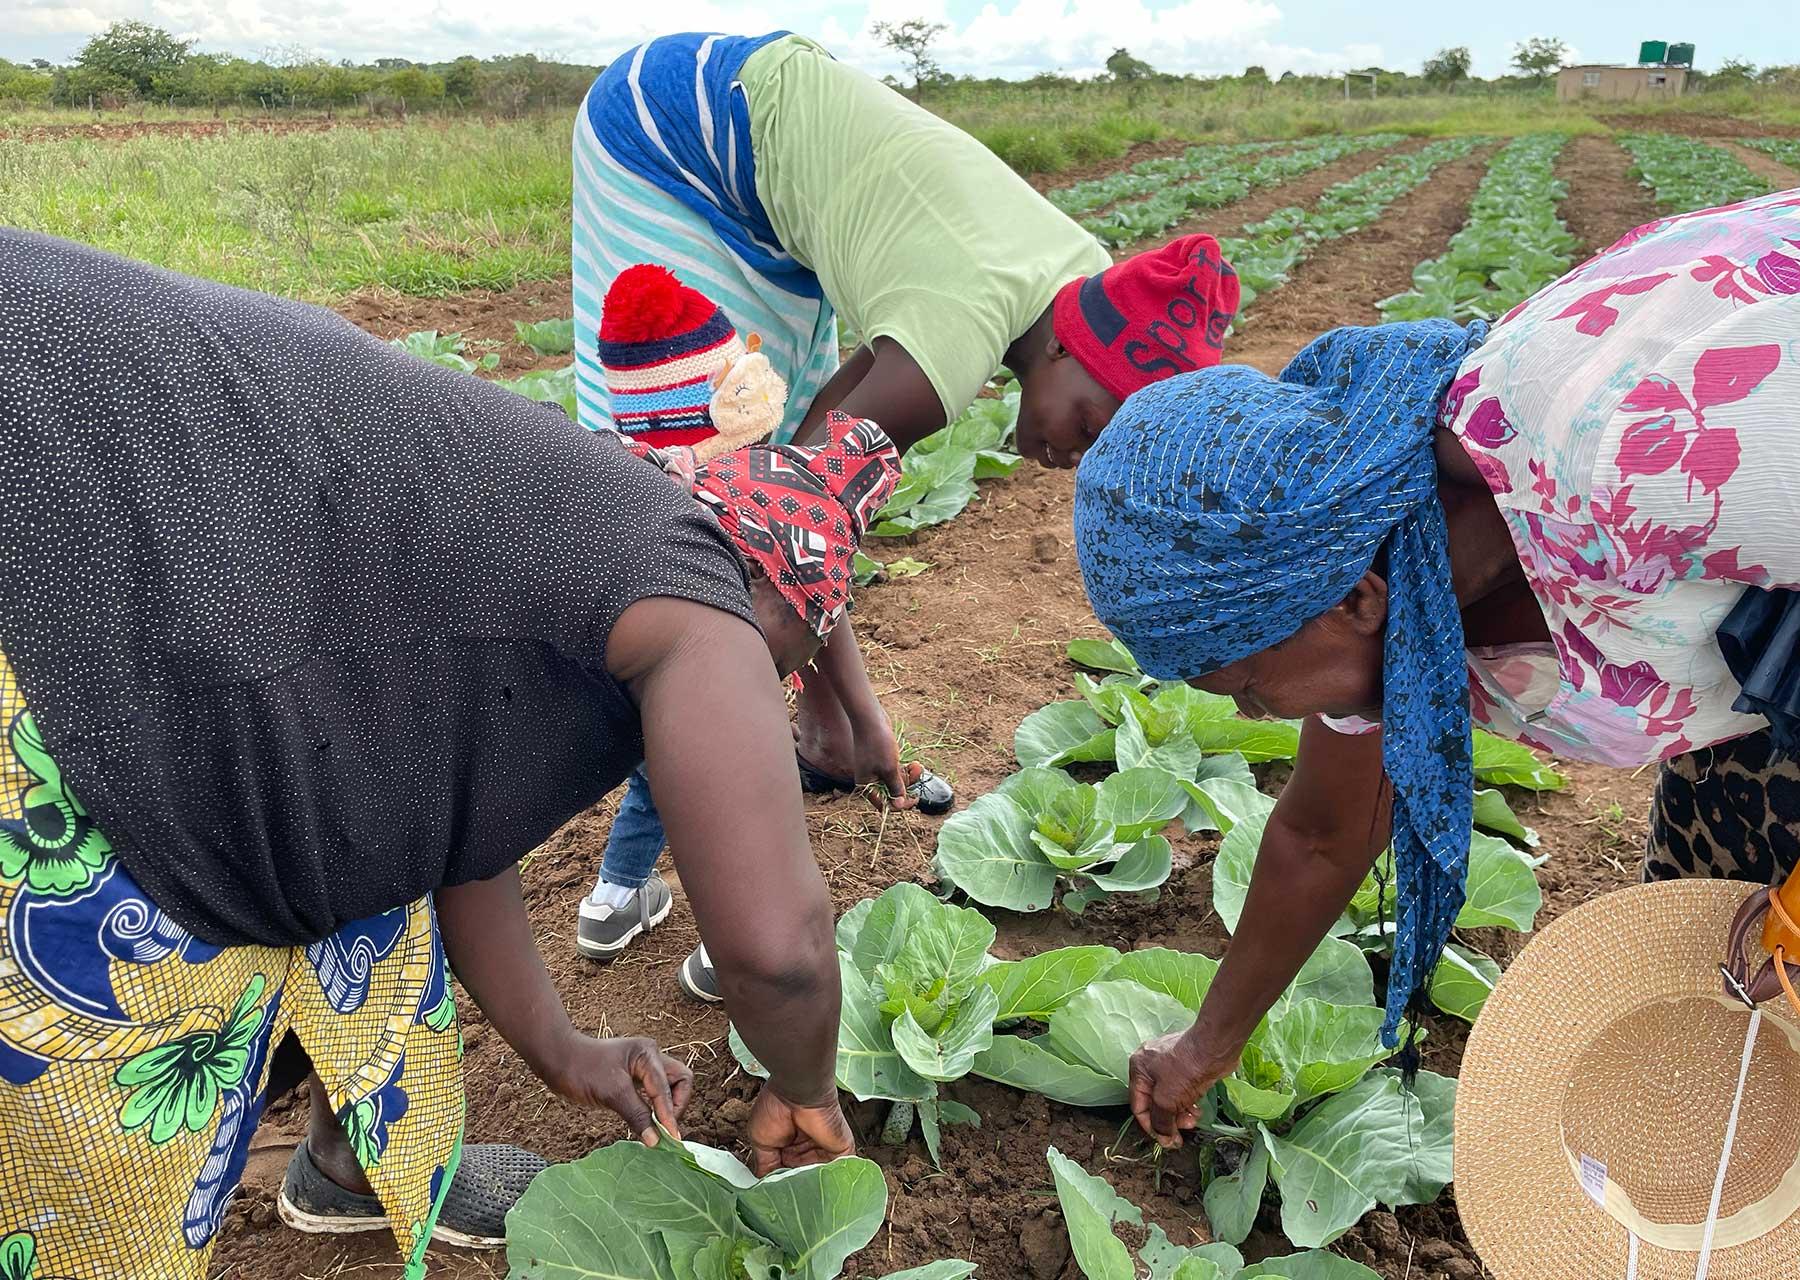 A community garden run by women in Mberengwa, Zimbabwe, where LWF supports skills development and advocacy training as part of its economic justice and women’s empowerment initiative. Photo: LWF/P. Bangoura 